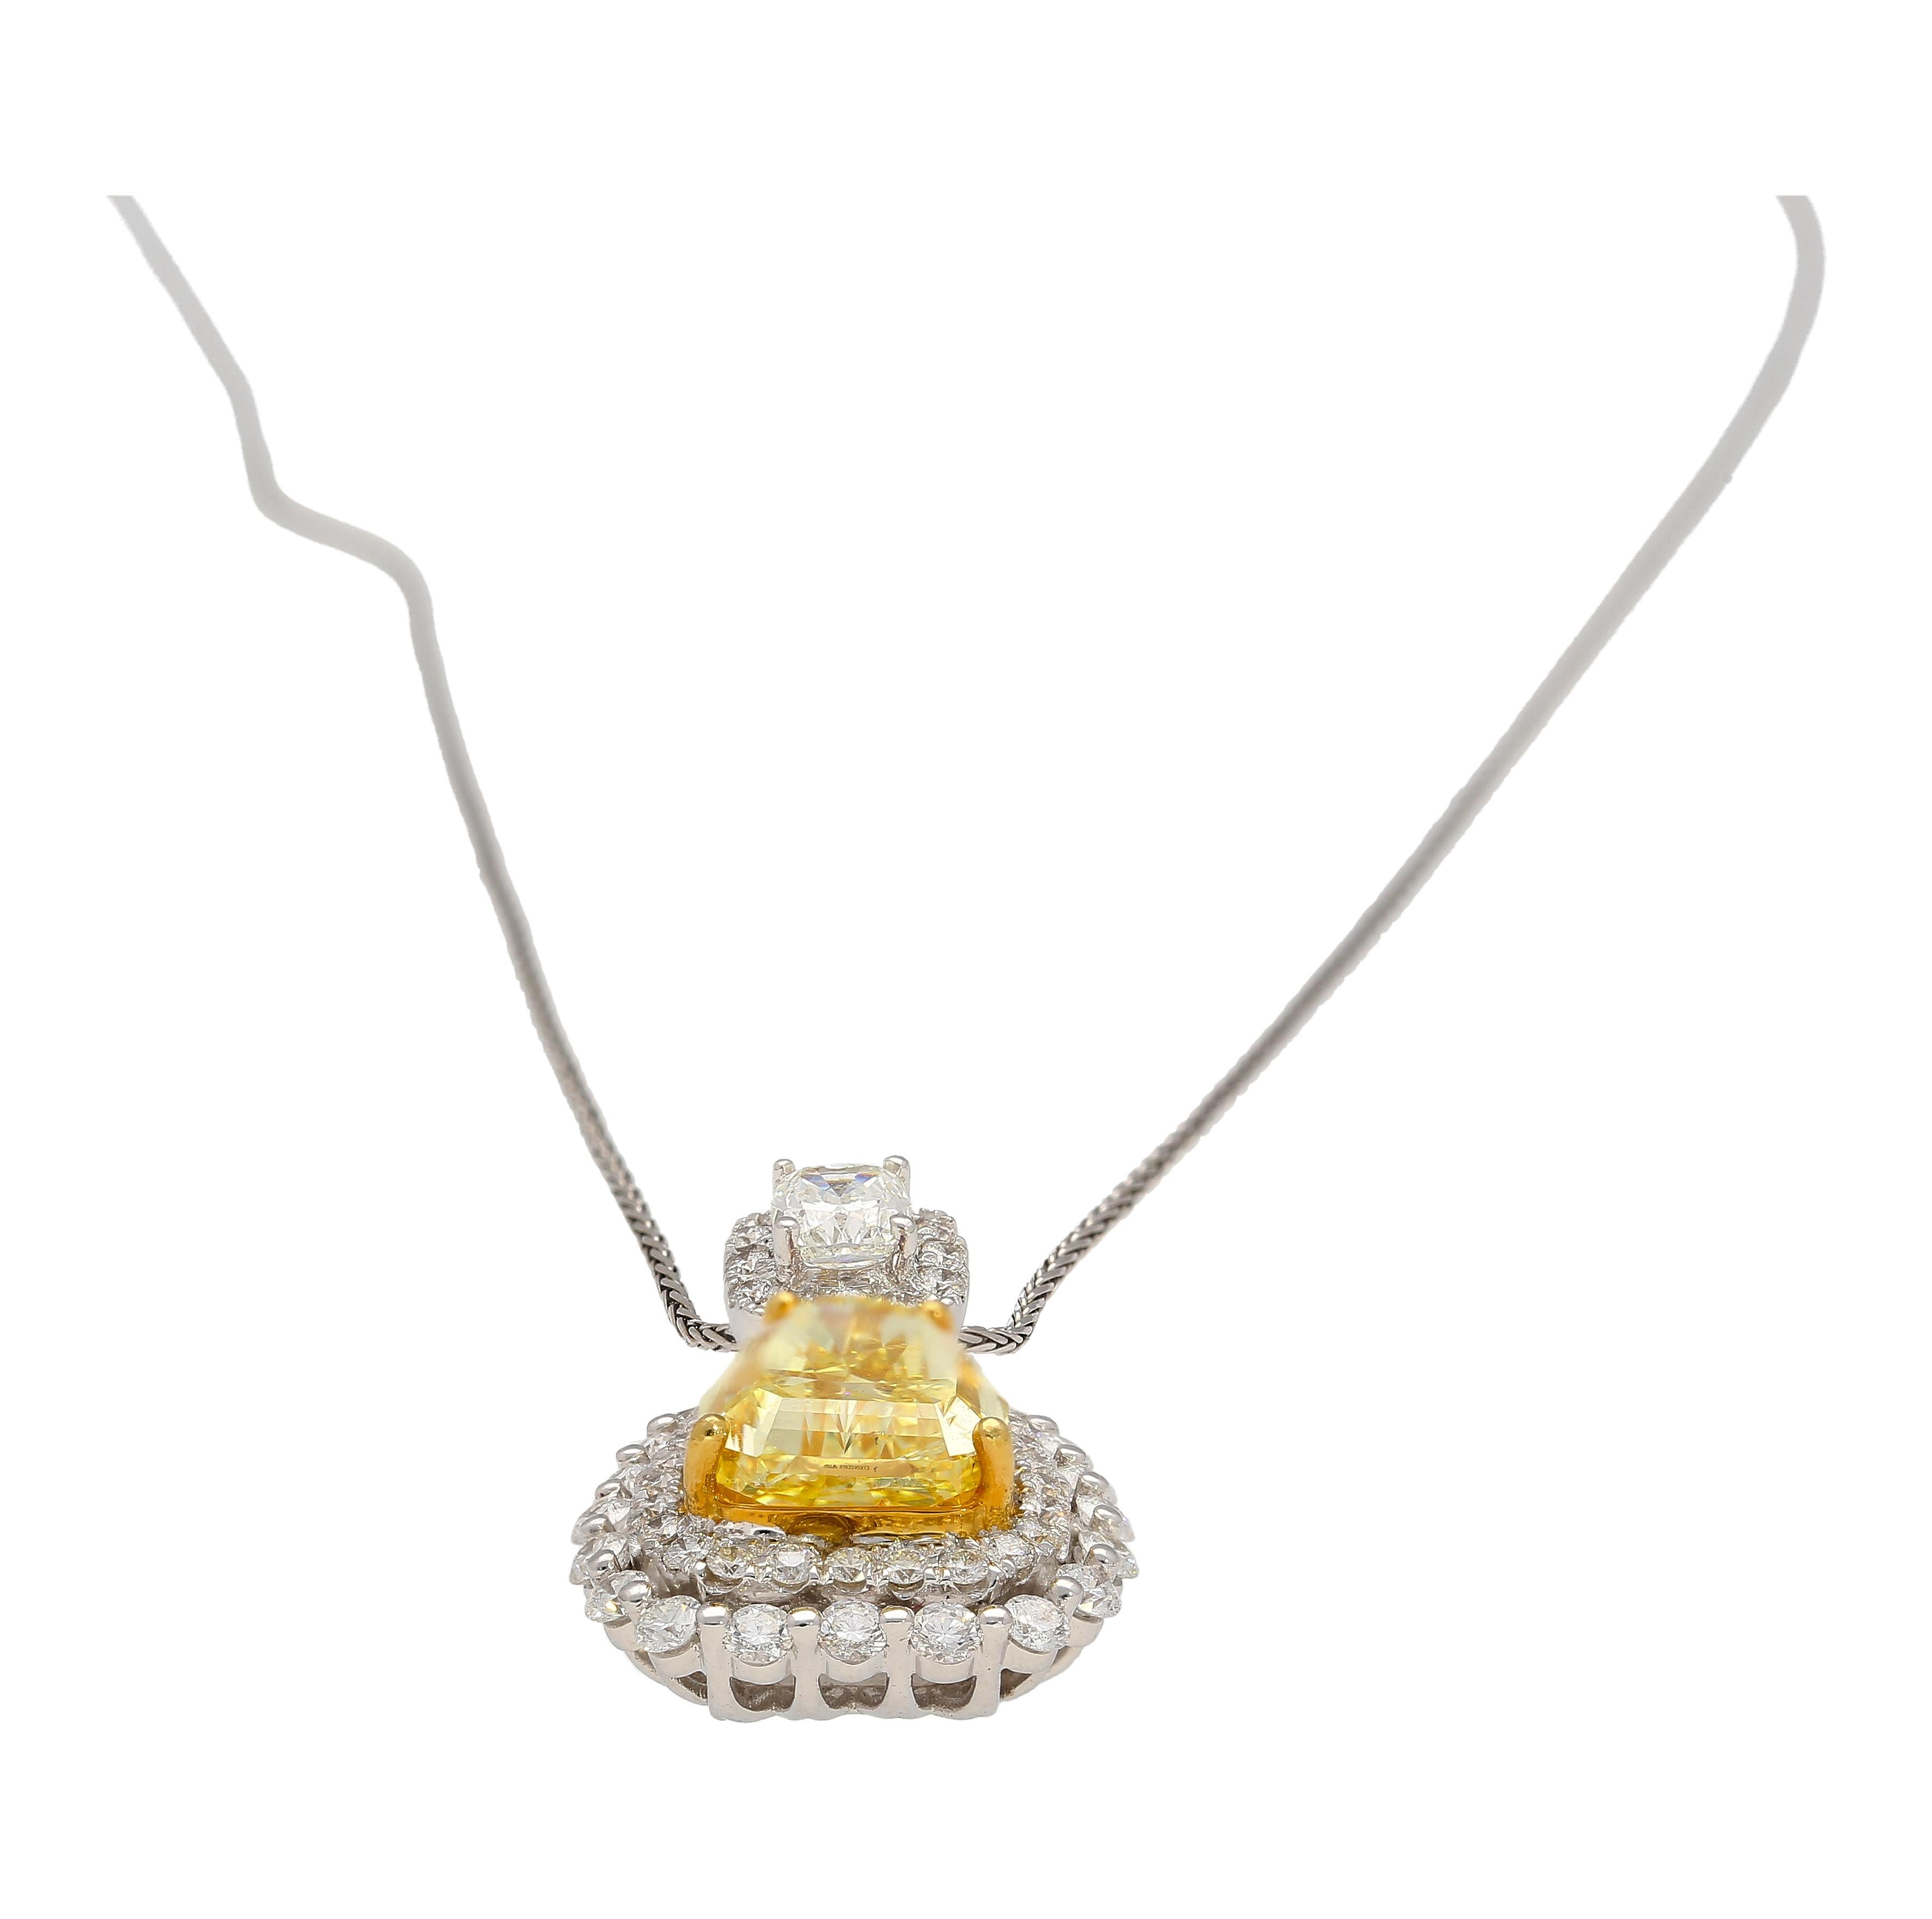 Indulge in the beauty and rarity of this natural GIA certified 3.28-carat Fancy Intense Yellow Shield Cut Diamond pendant with multi-colored diamond side stones, expertly crafted in 18K White and Yellow Gold. Featuring 58 round-cut diamond accents